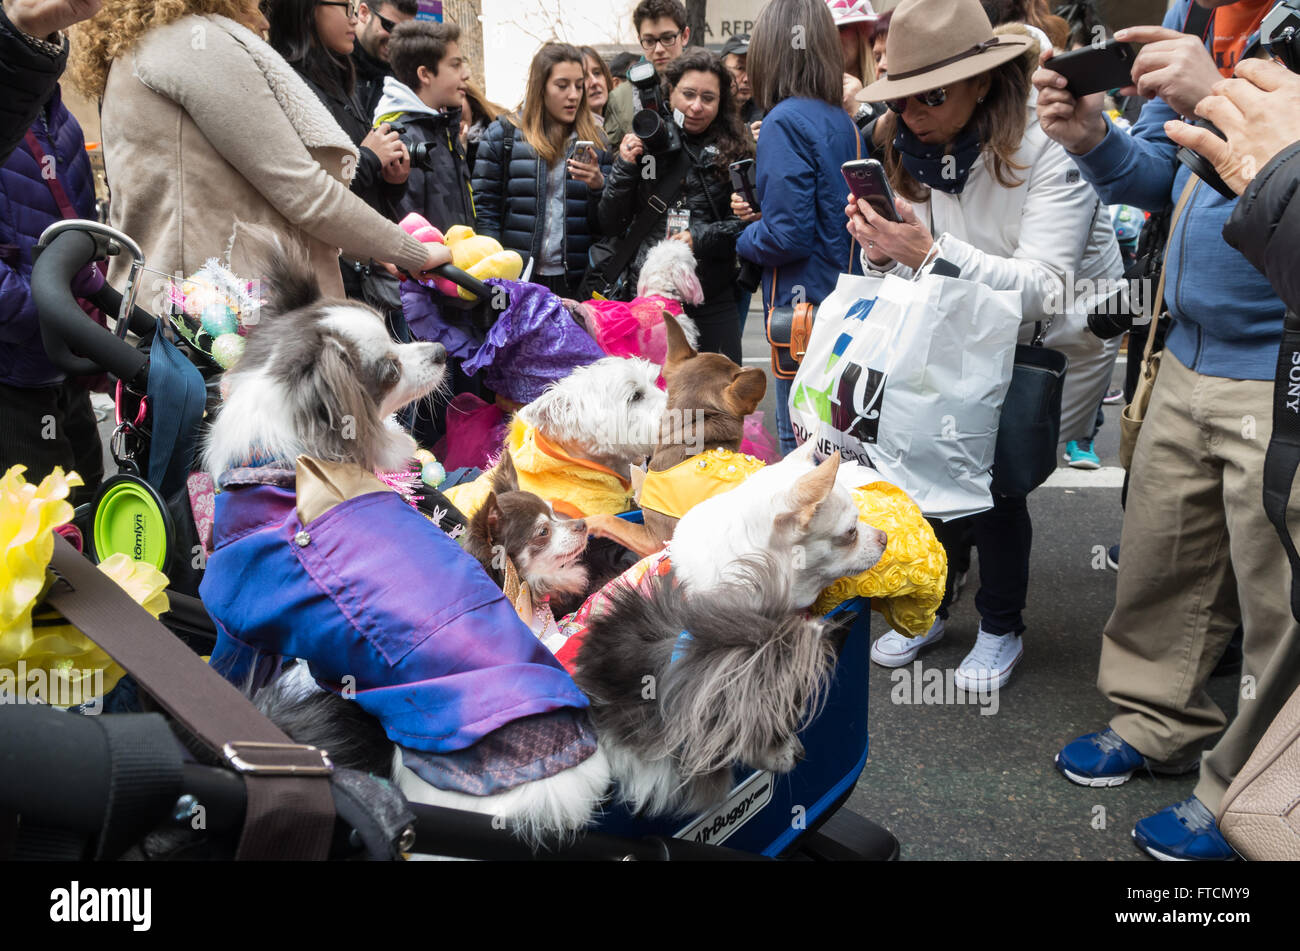 People taking photographs of a stroller full of small dogs (chihuahuas) dressed in colourful coats at the annual Easter Parade and bonnet festival in New York City Stock Photo